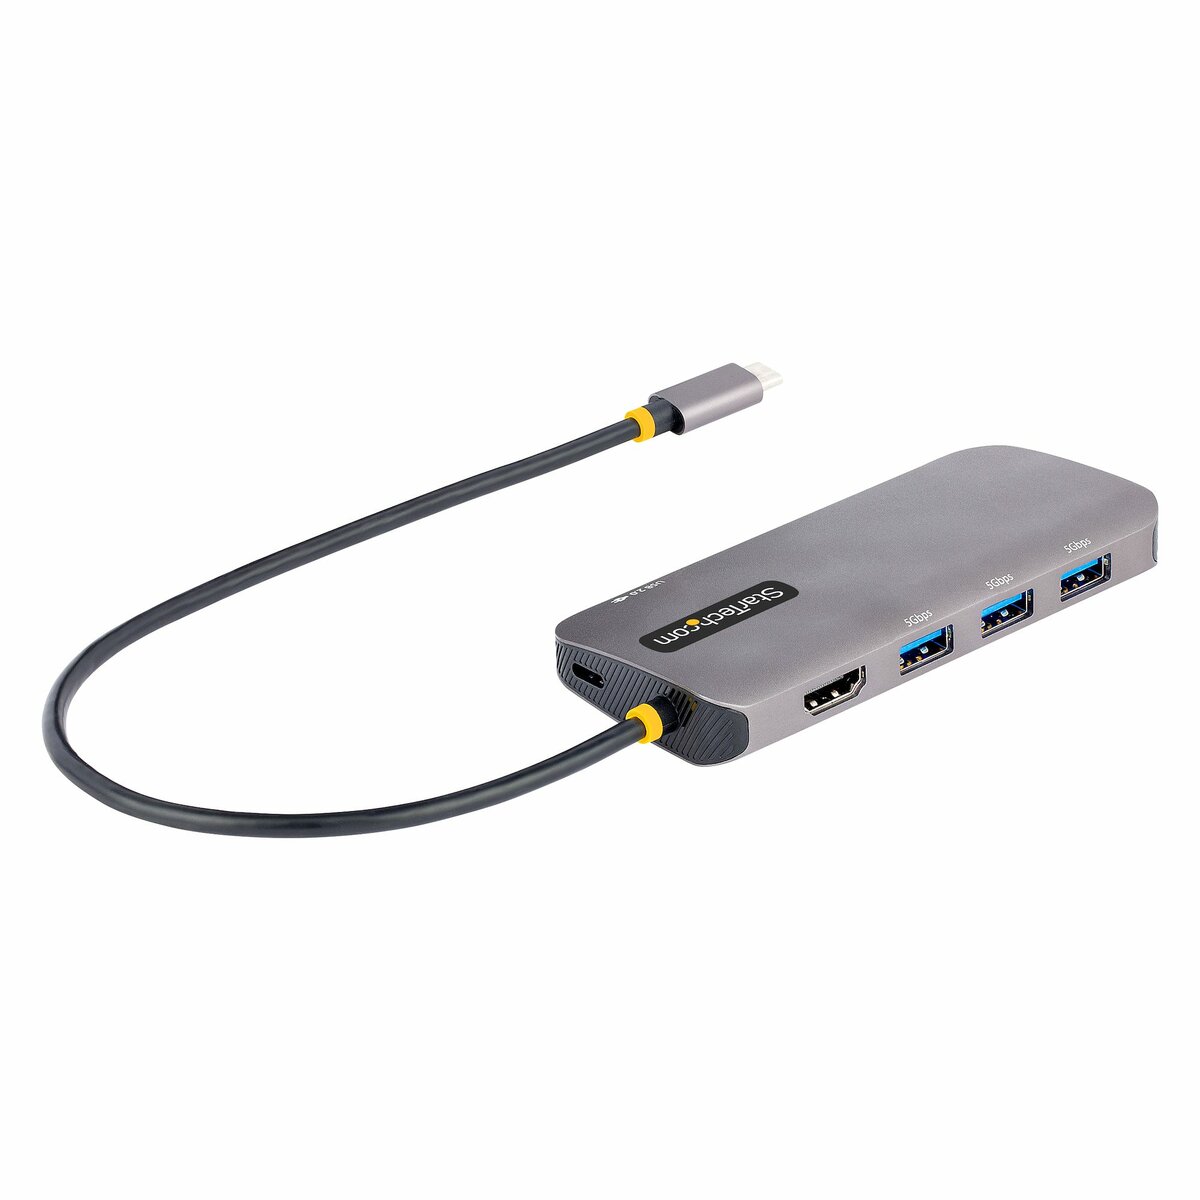 StarTech.com 4 Port USB C Hub - 4x USB-A - 5Gbps USB 3.0 Type-C Hub (USB 3.2 /3.2 Gen 1) - Bus Powered - 11 Long Cable w/ Cable Management - Bus Powered